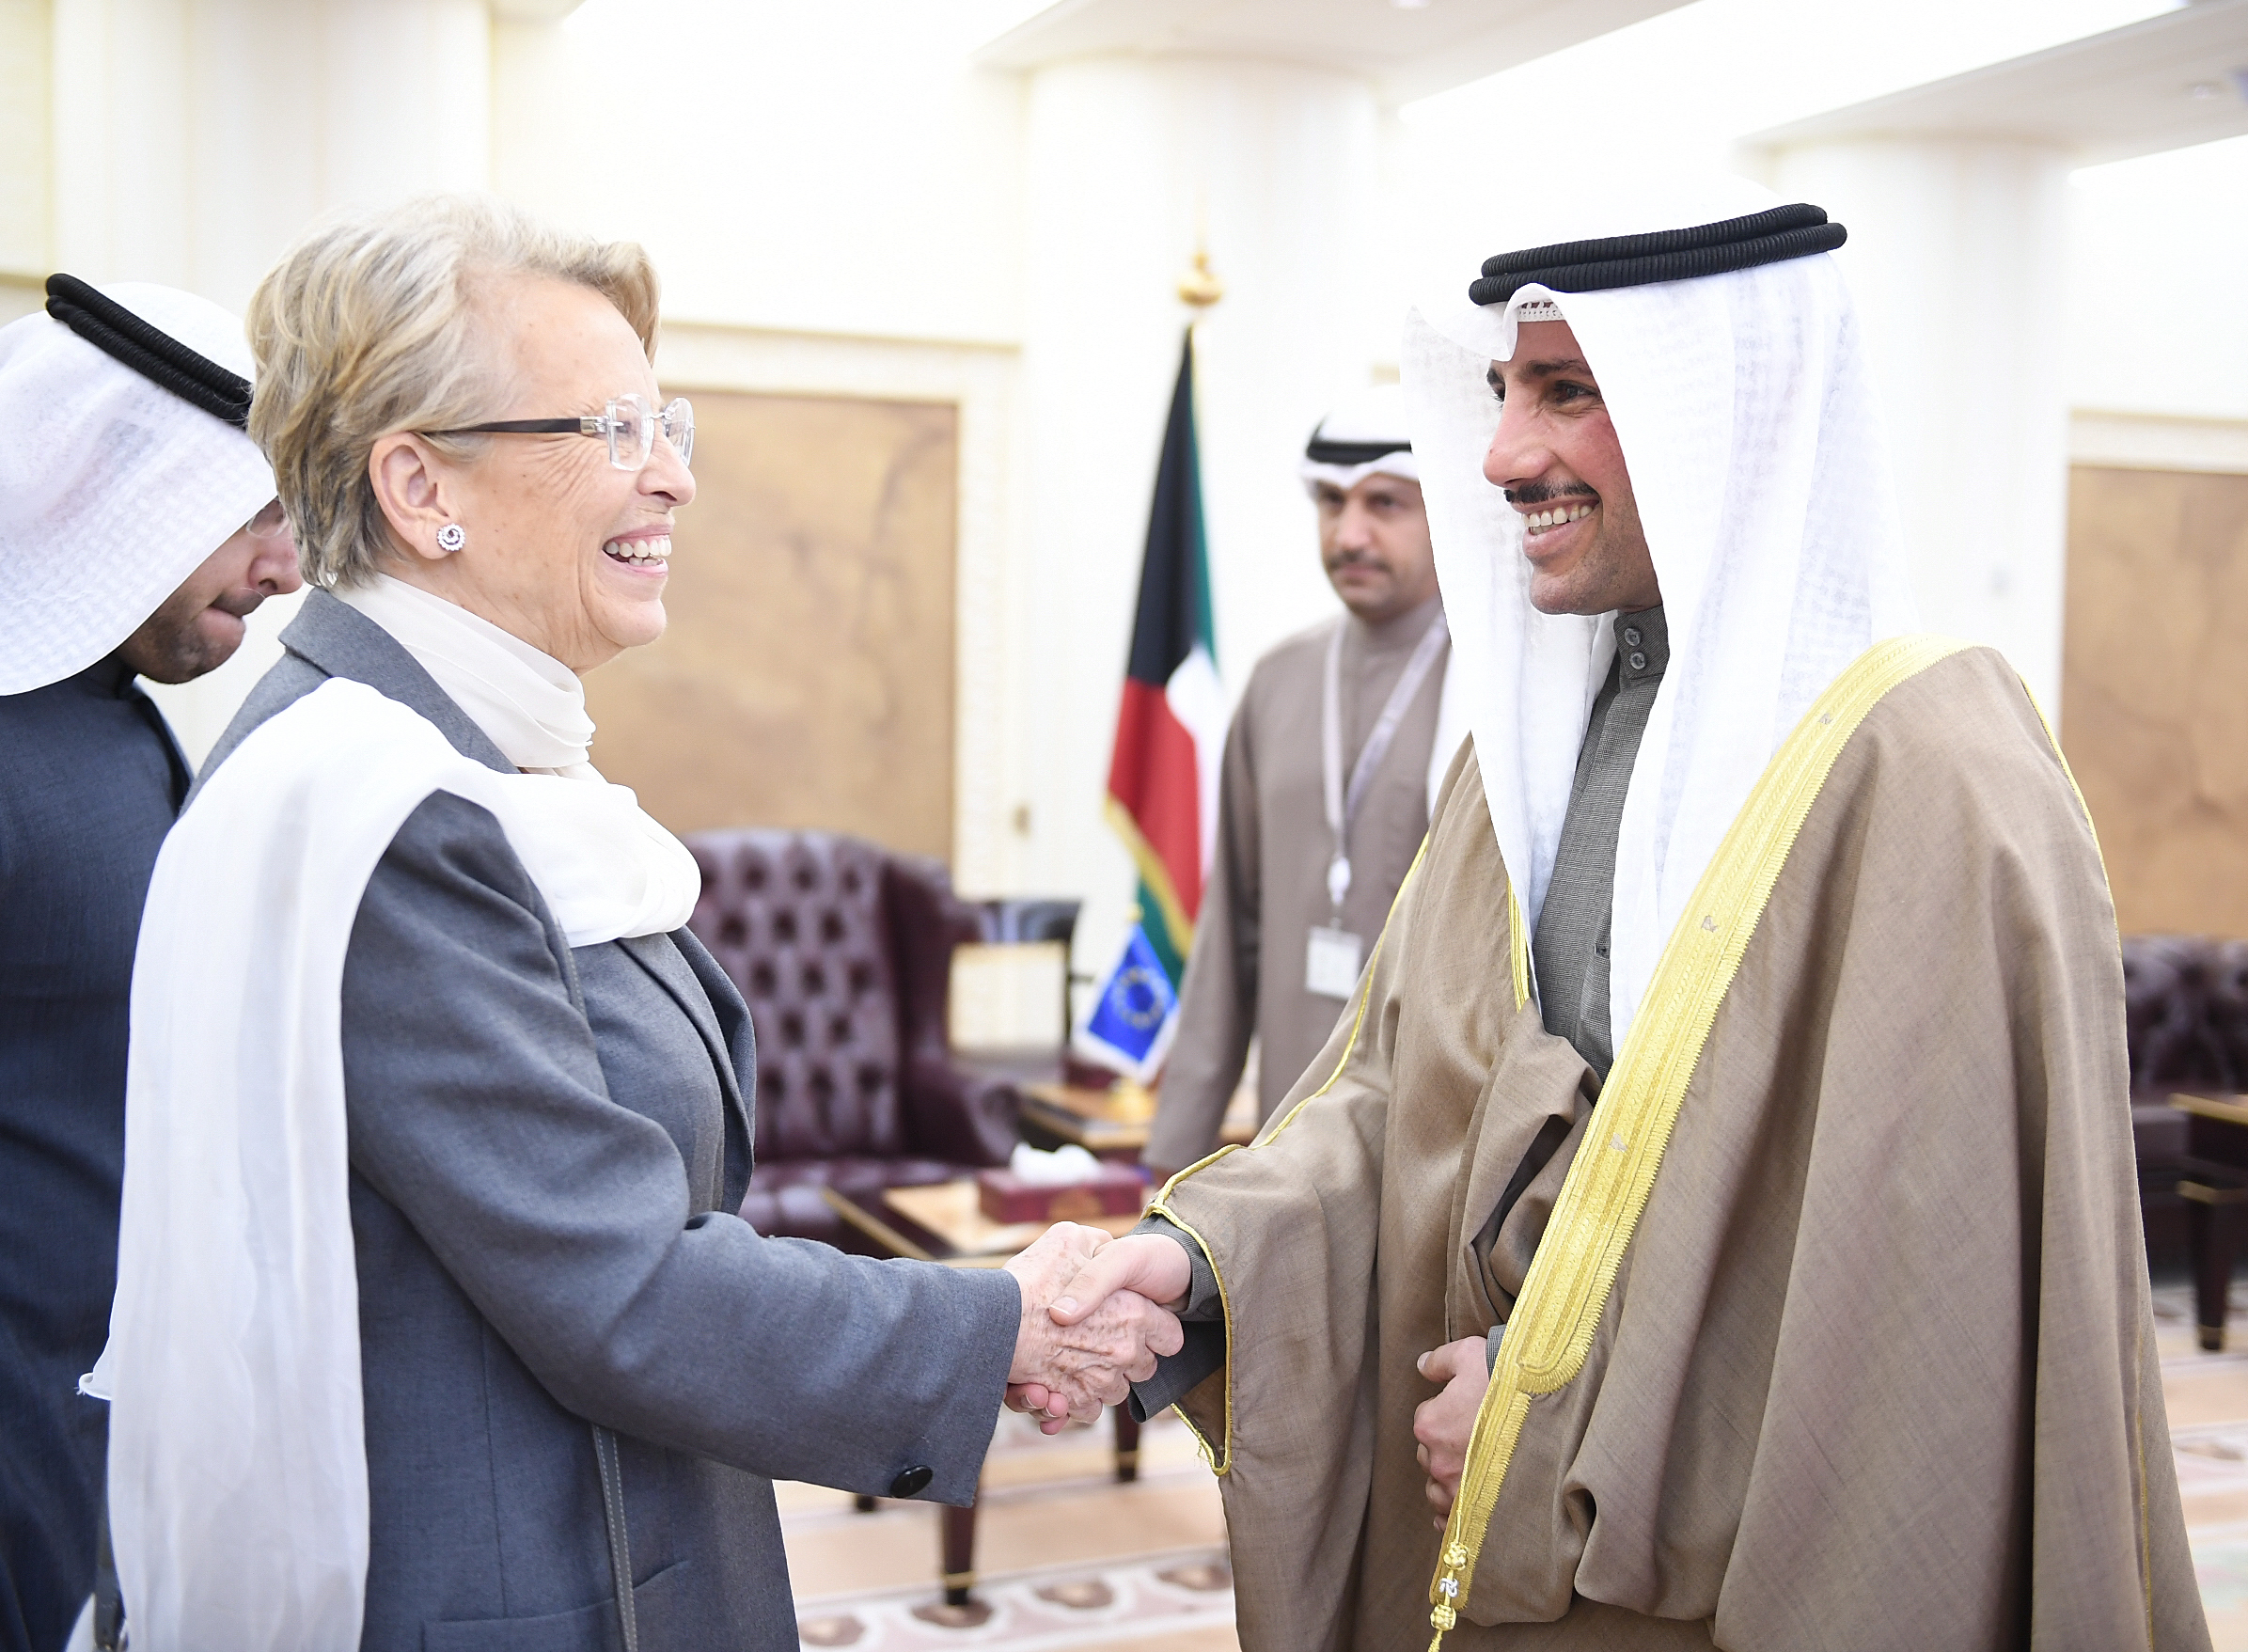 National Assembly Speaker Marzouq Ali Al-Ghanim received Chairperson of the Committee on European Relations with the Arab Peninsula in the European Parliament Michelle Alliot-Marie